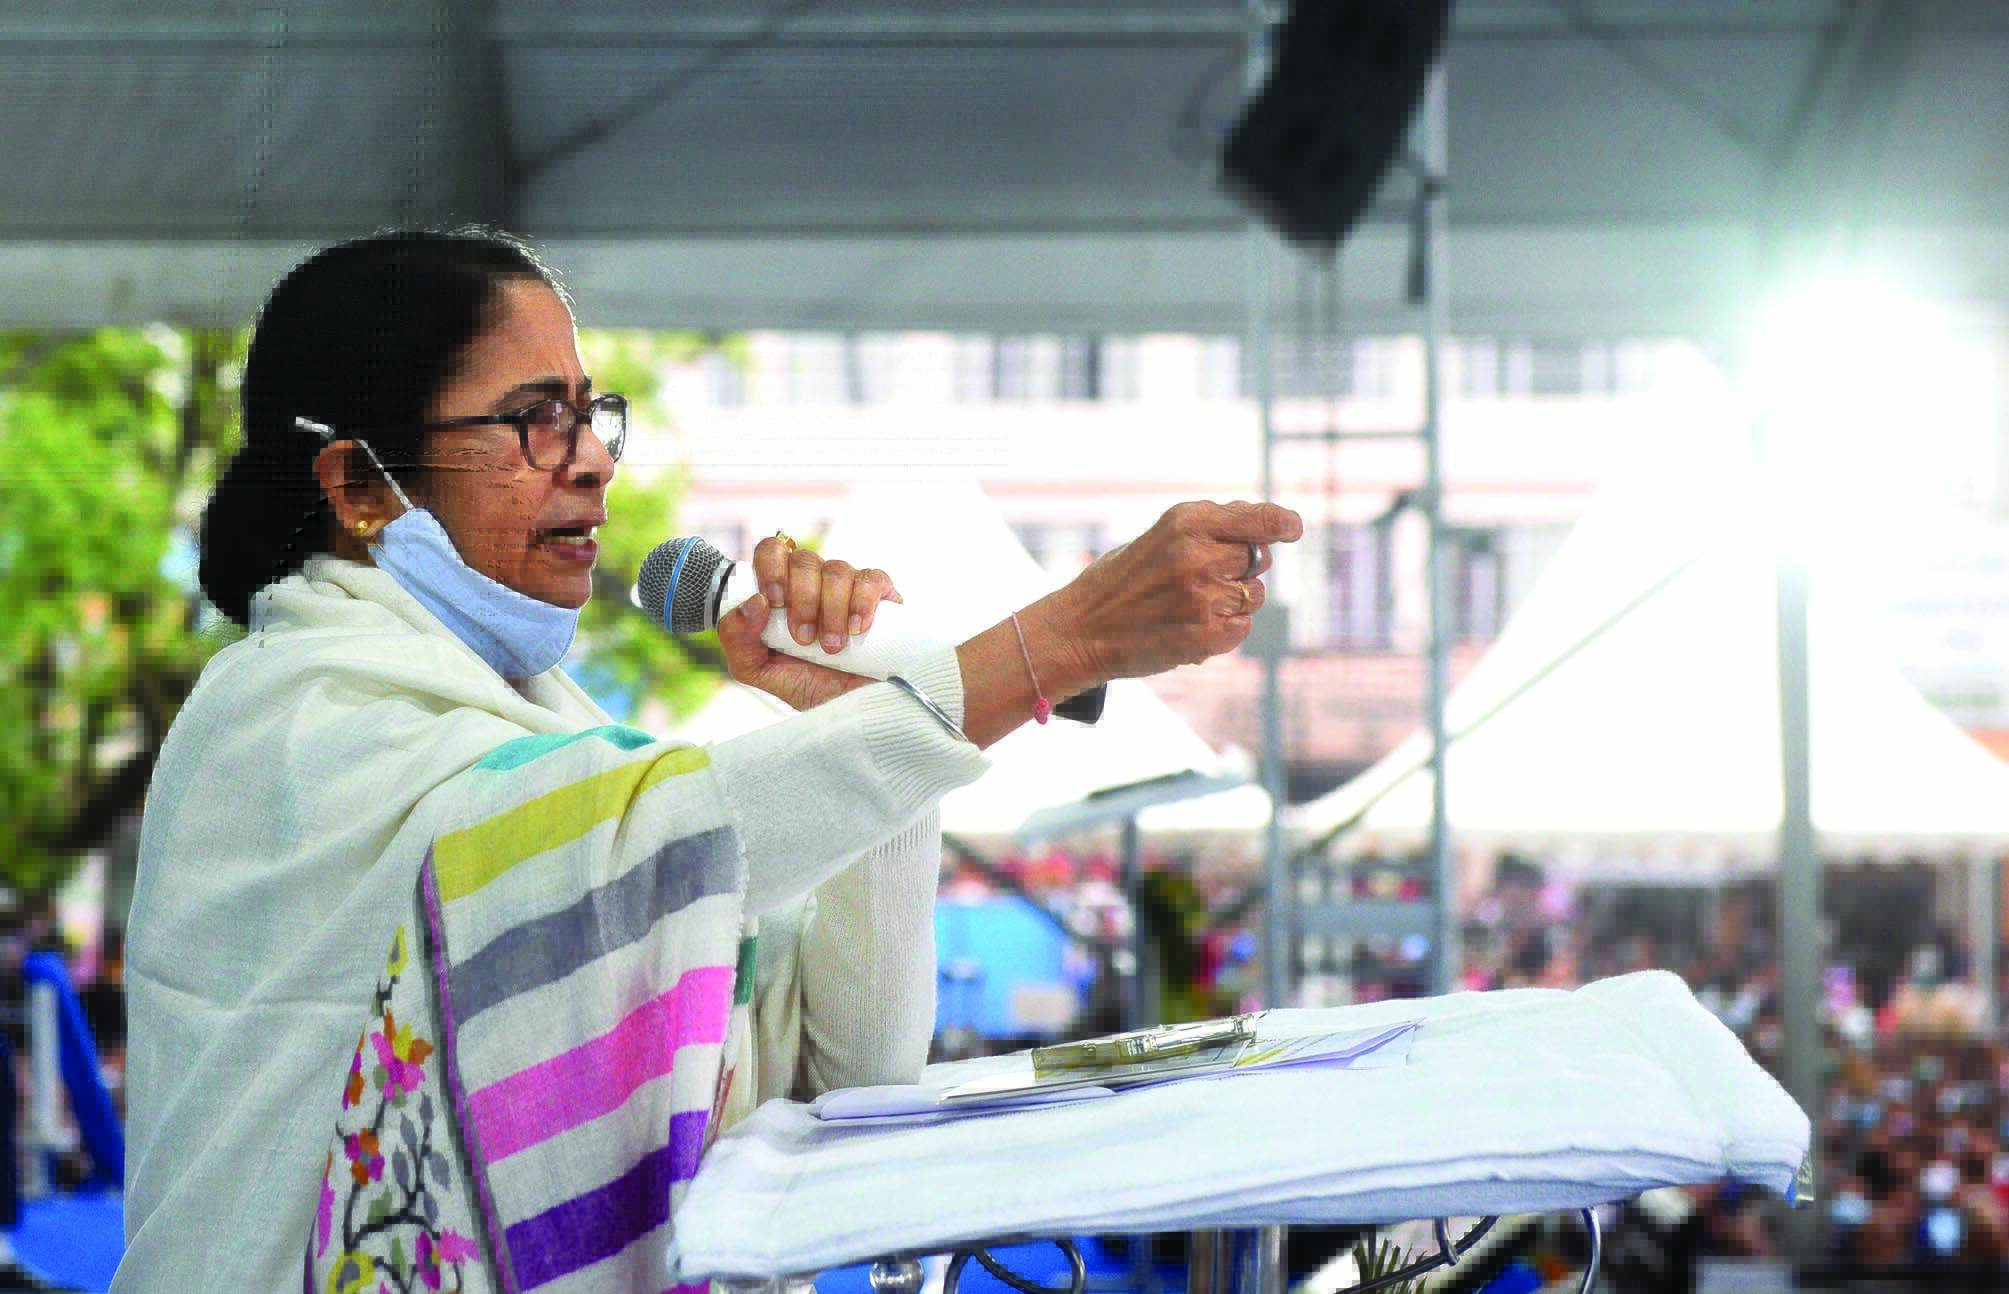 Mamata writes to Oppn leaders to fight unitedly against misuse of agencies